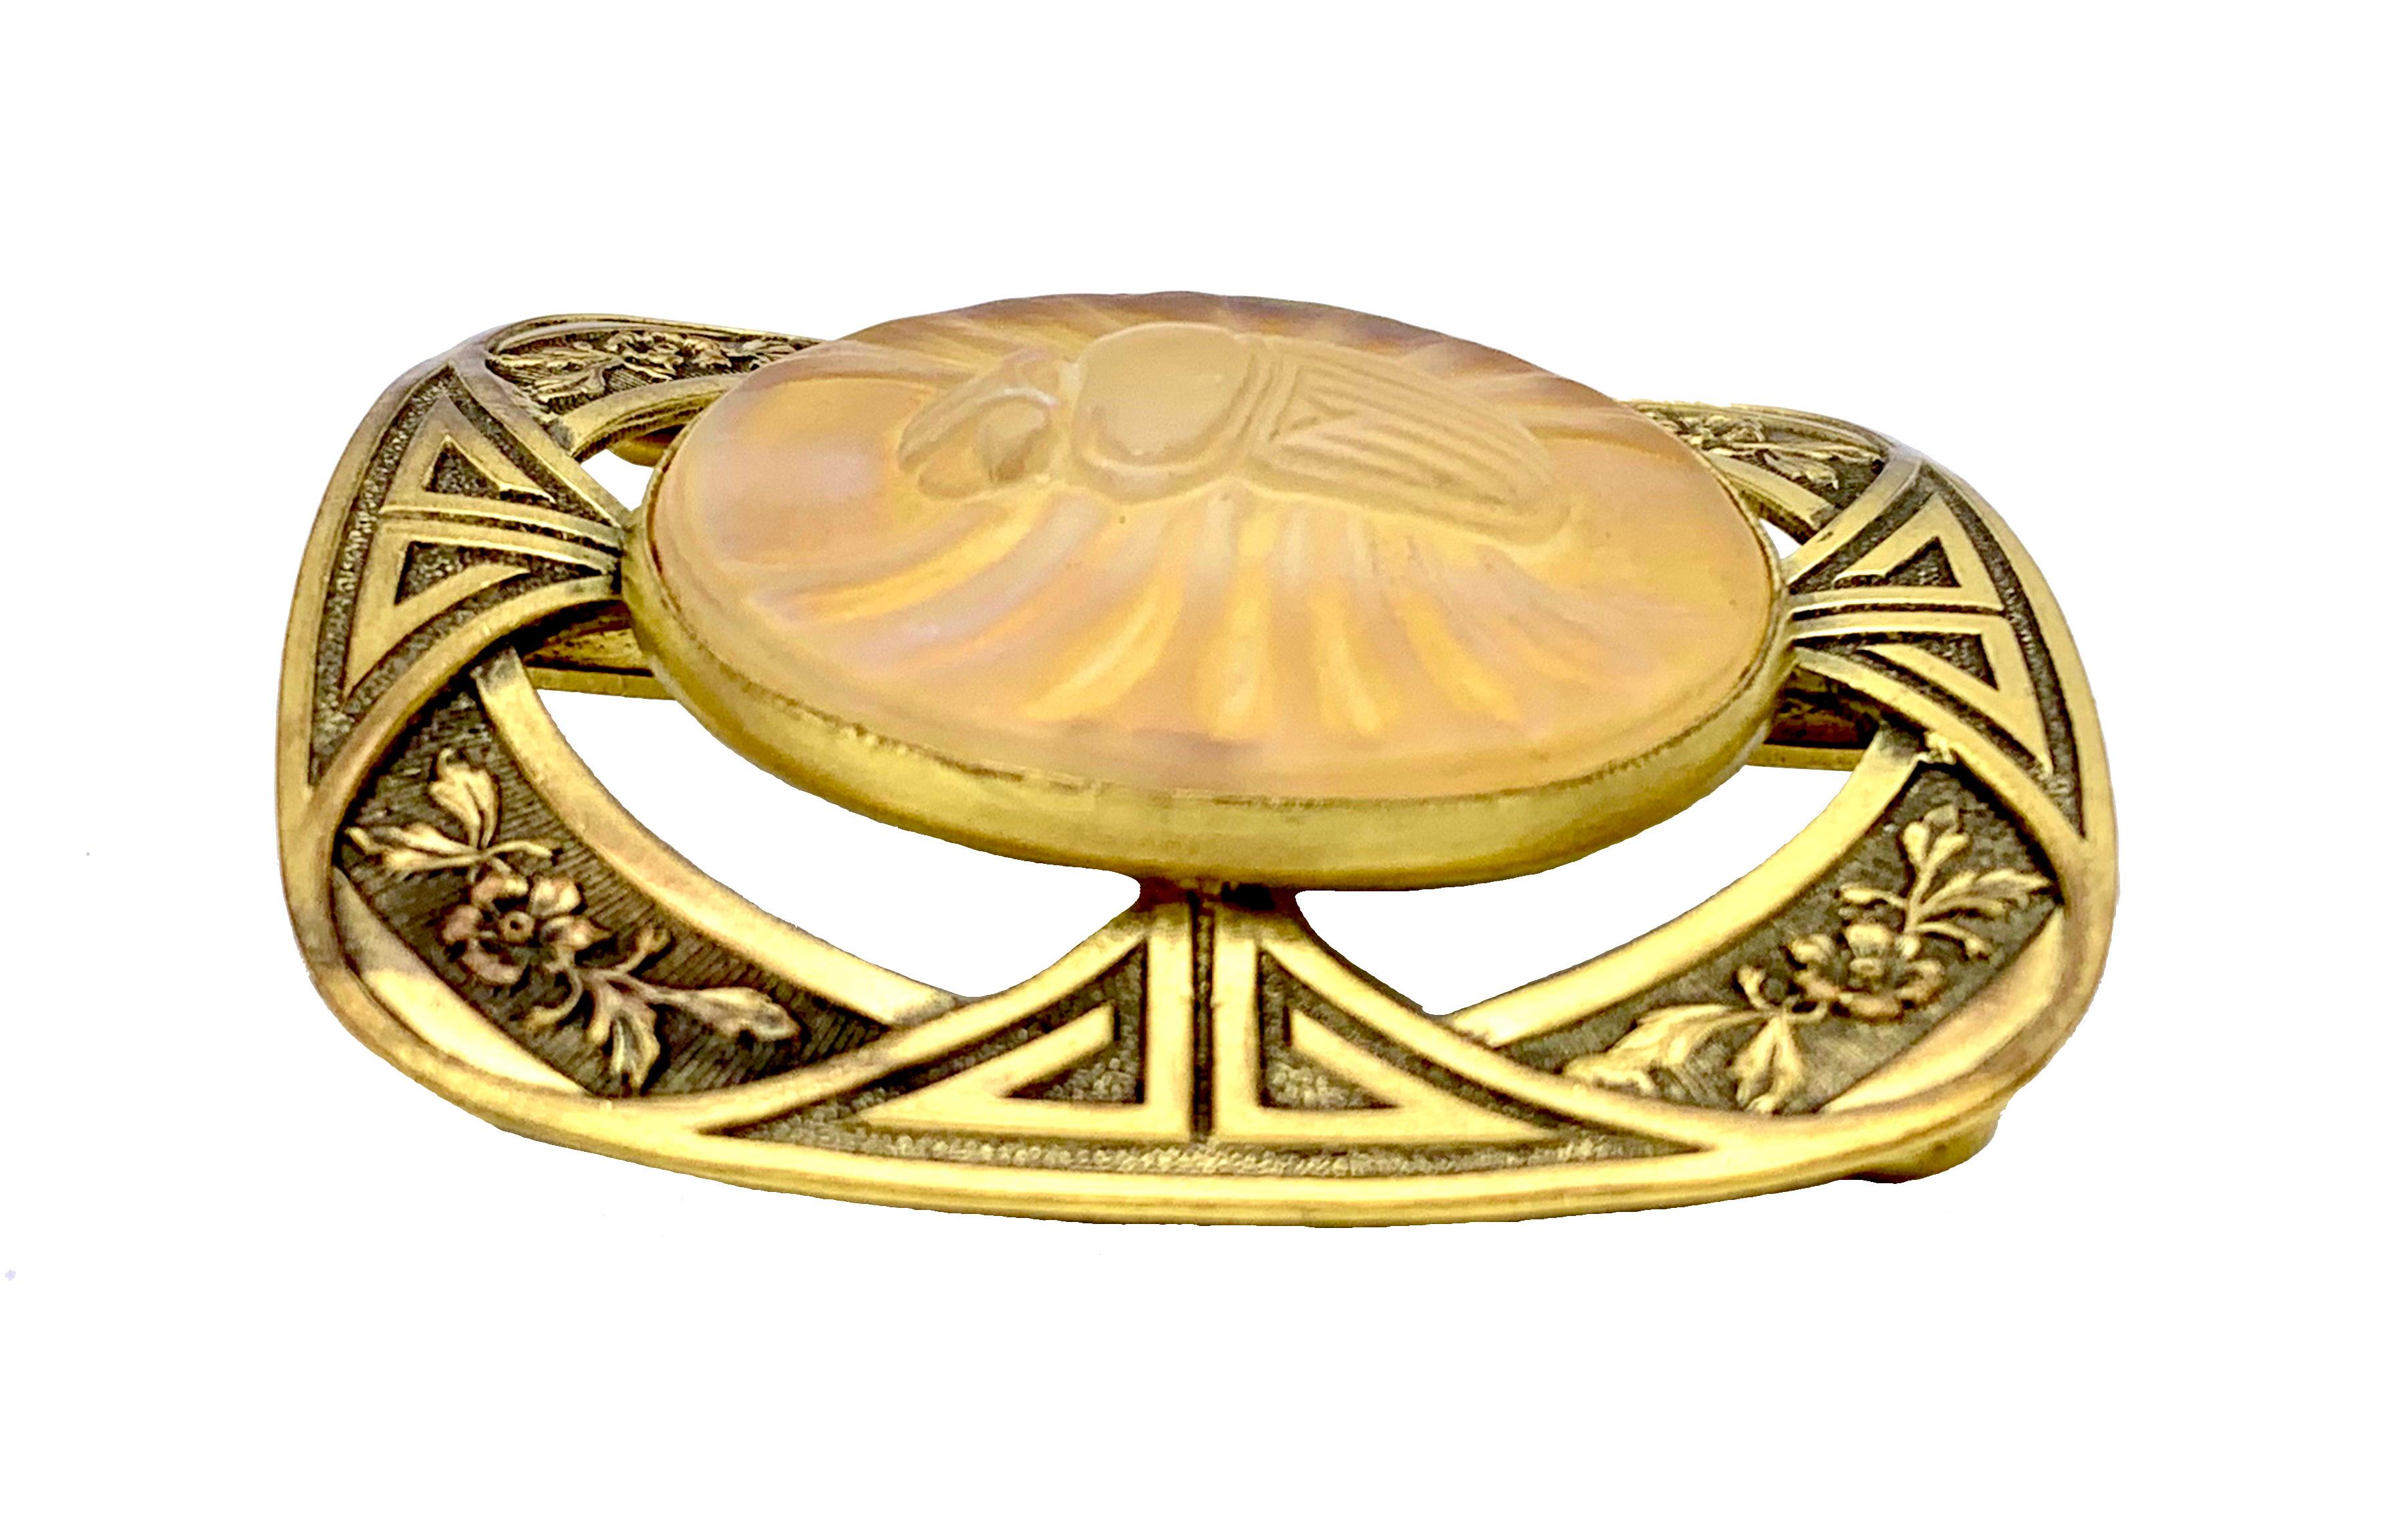 This beautiful round piece of gold coloured pâte de verre depicting a winged scarab was created around 1900, probably in Nancy, France.  It is mounted in a square belt buckle with rounded corners, a strong piece of Art Nouveau design.
It has been